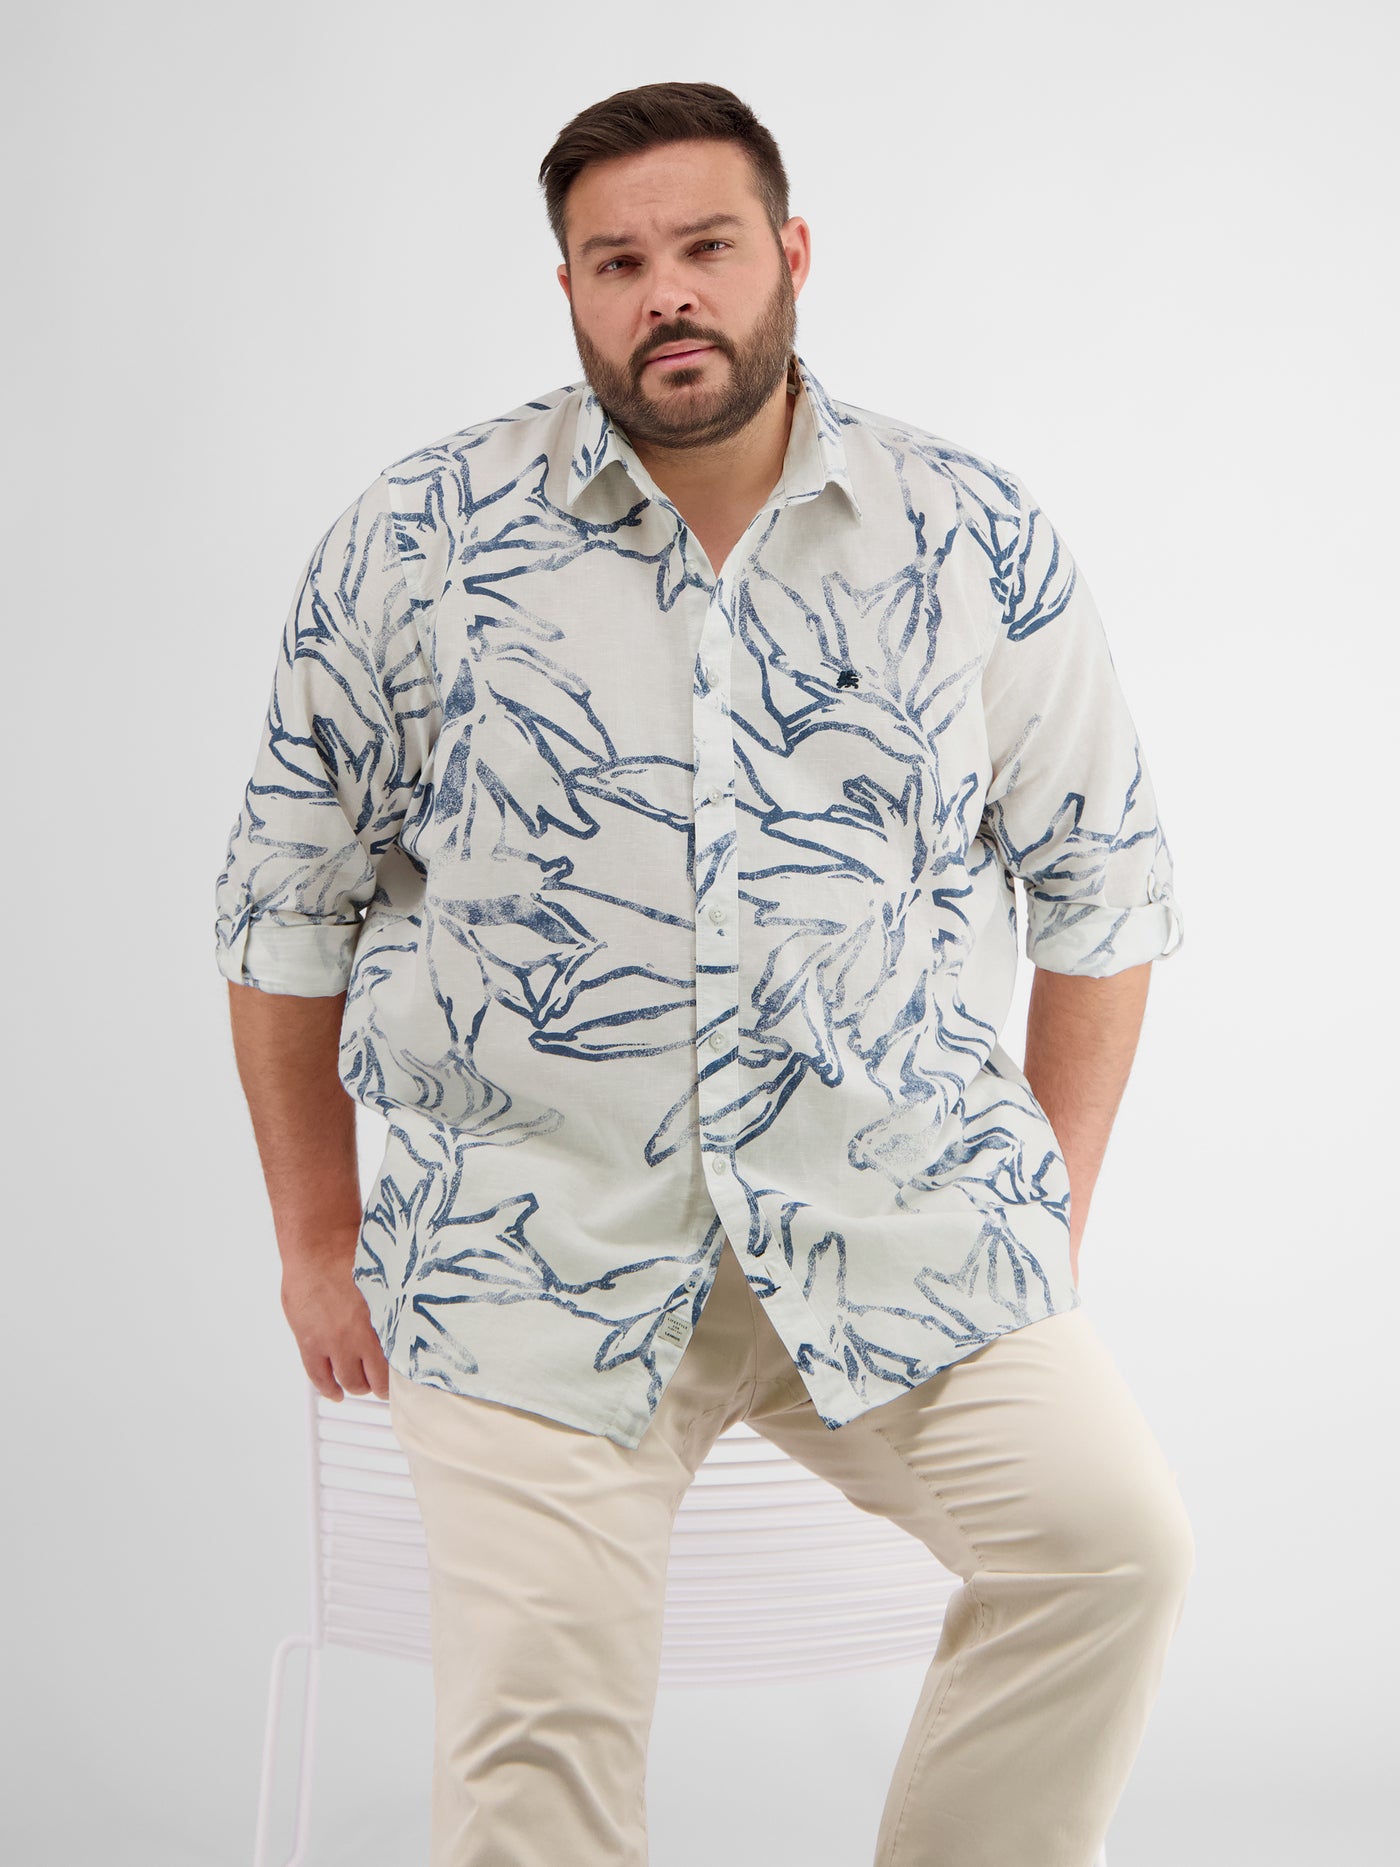 Men's long-sleeved shirt with a summery print